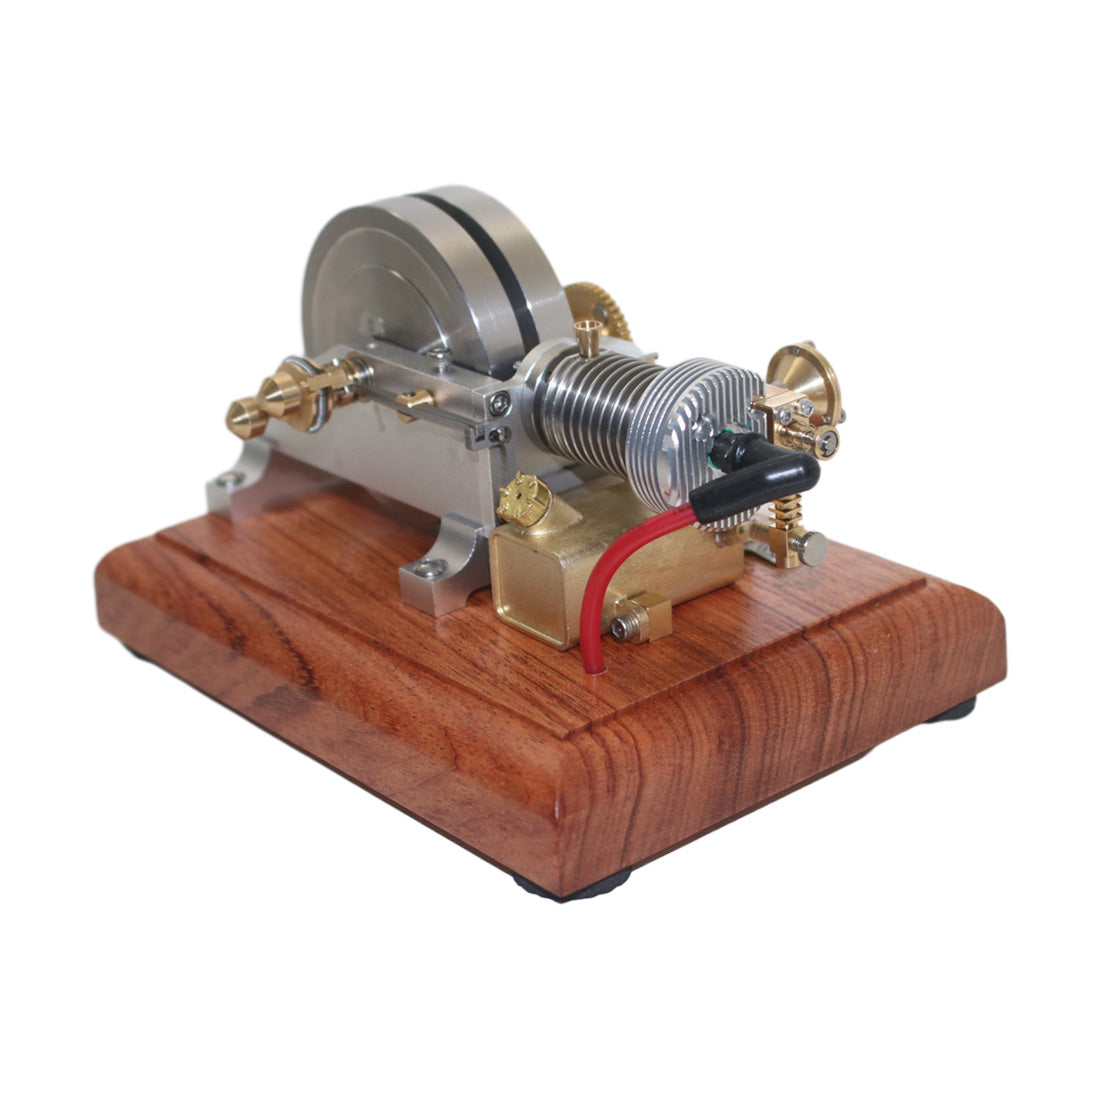 4 Cycle Odd Ball Miniature Hit and Miss Gas Engine Model Air-Cooled M96 - stirlingkit